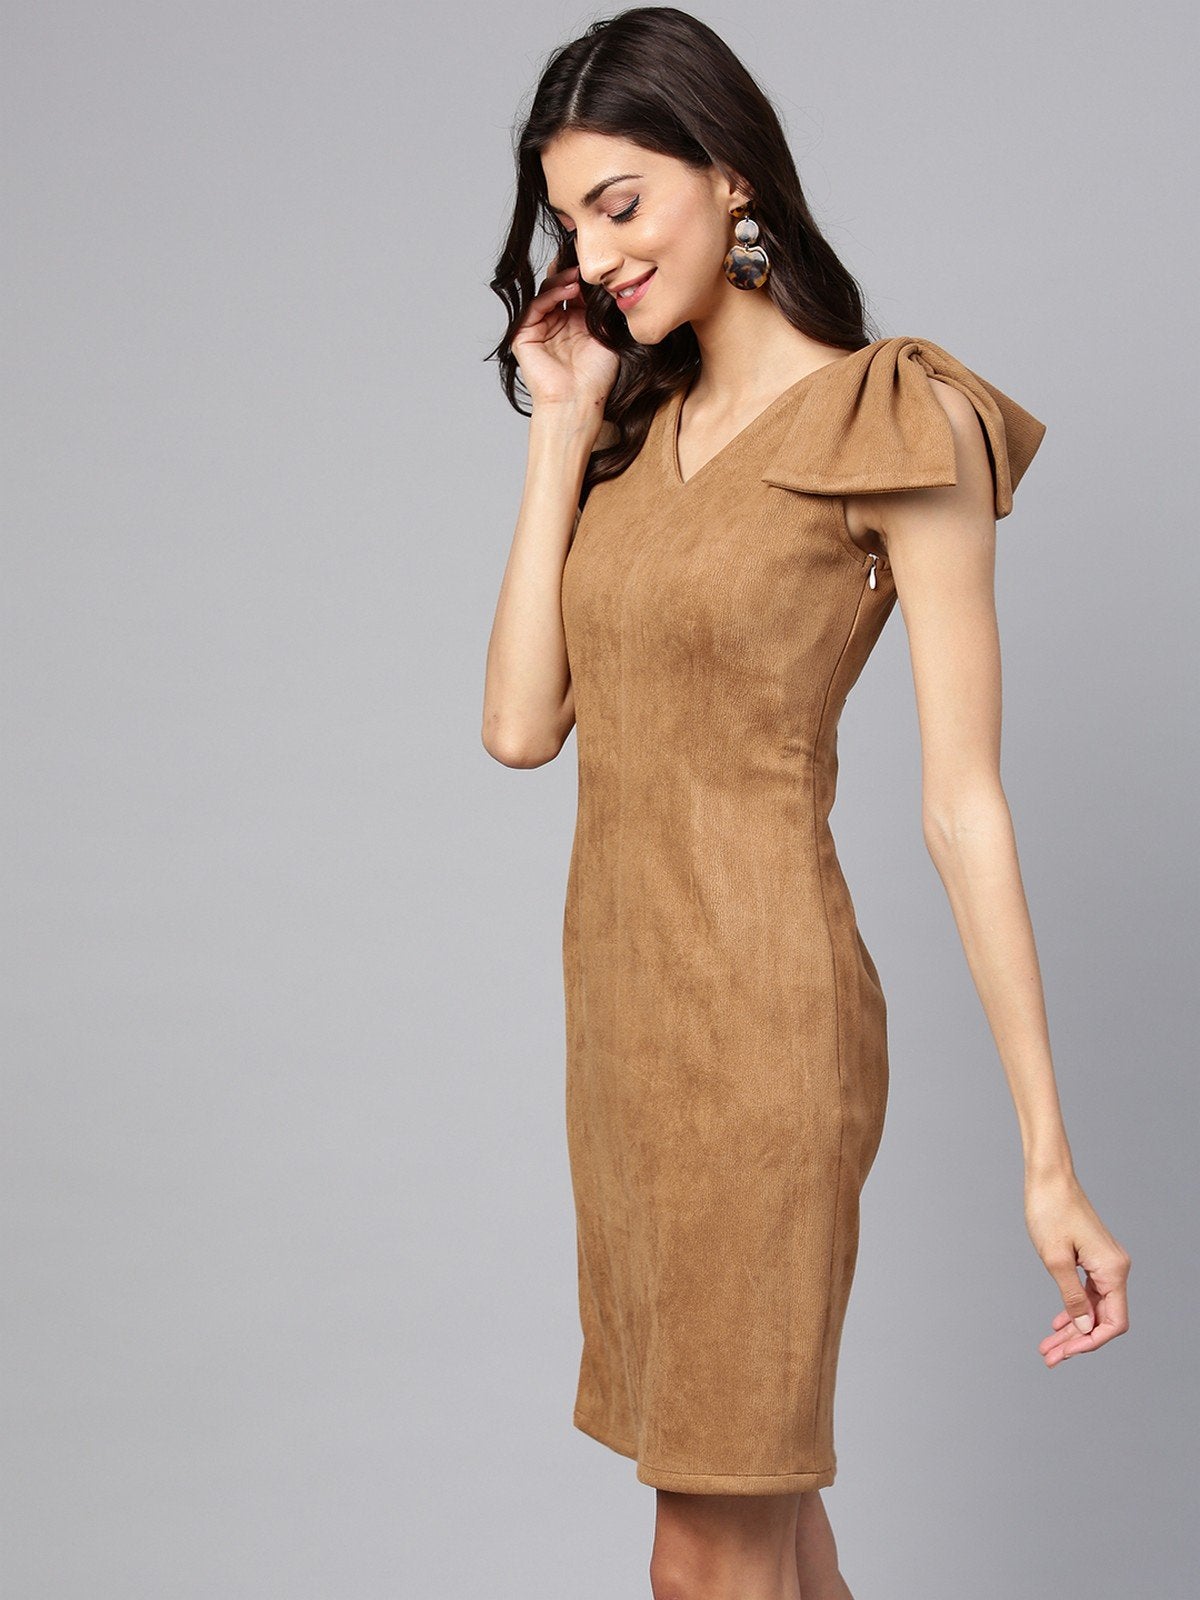 Women's Fitted Side Bow Suede Dress - Pannkh